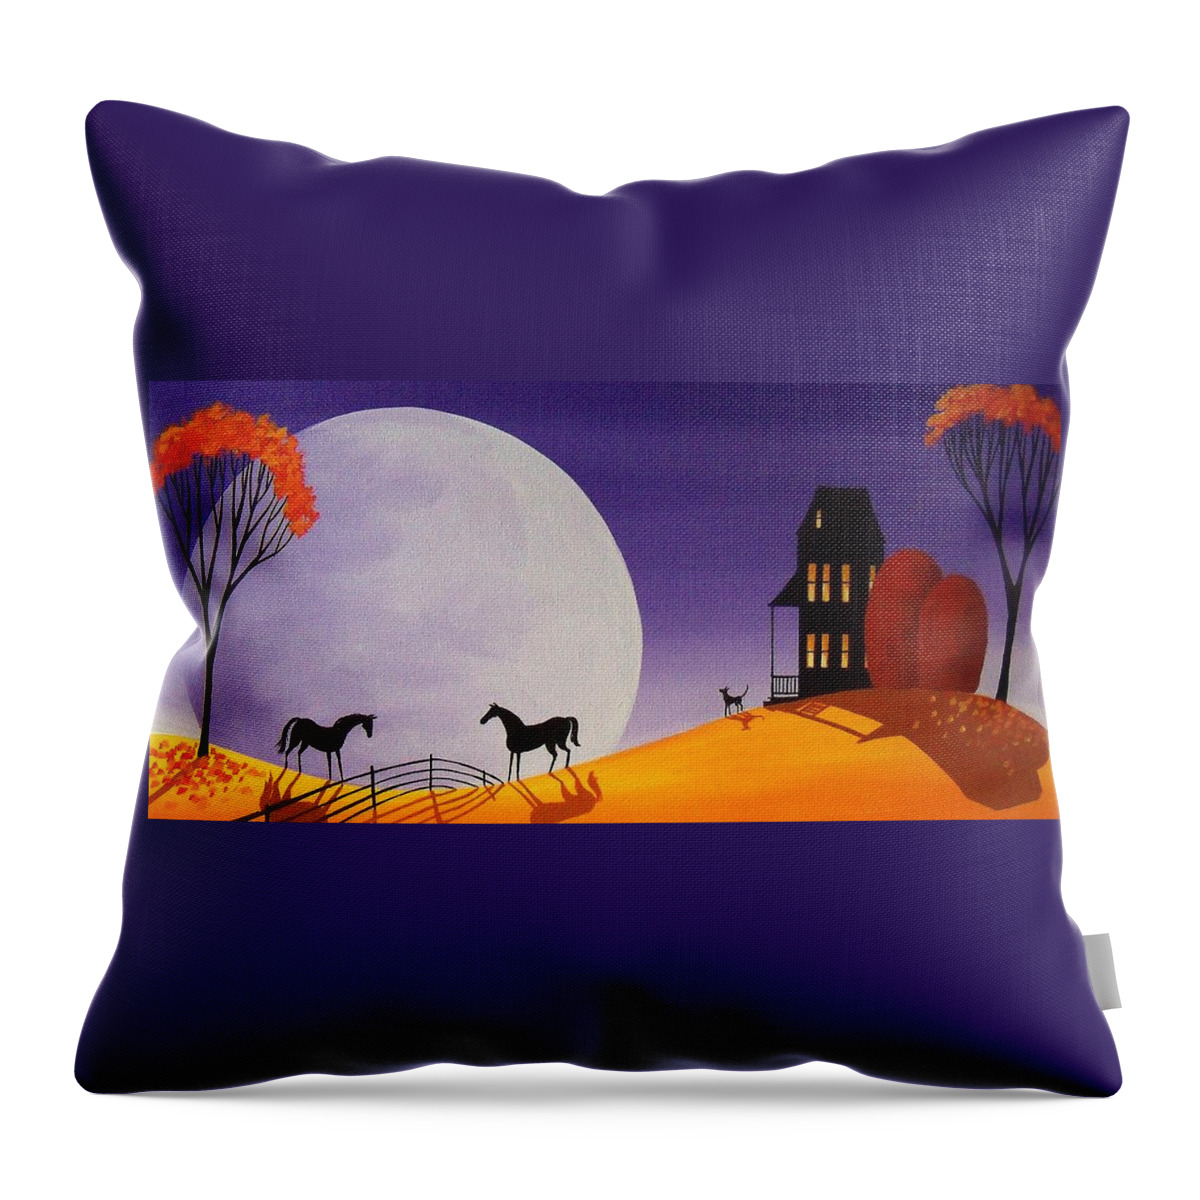 Folk Art Throw Pillow featuring the painting The Other Side - moon country landscape by Debbie Criswell